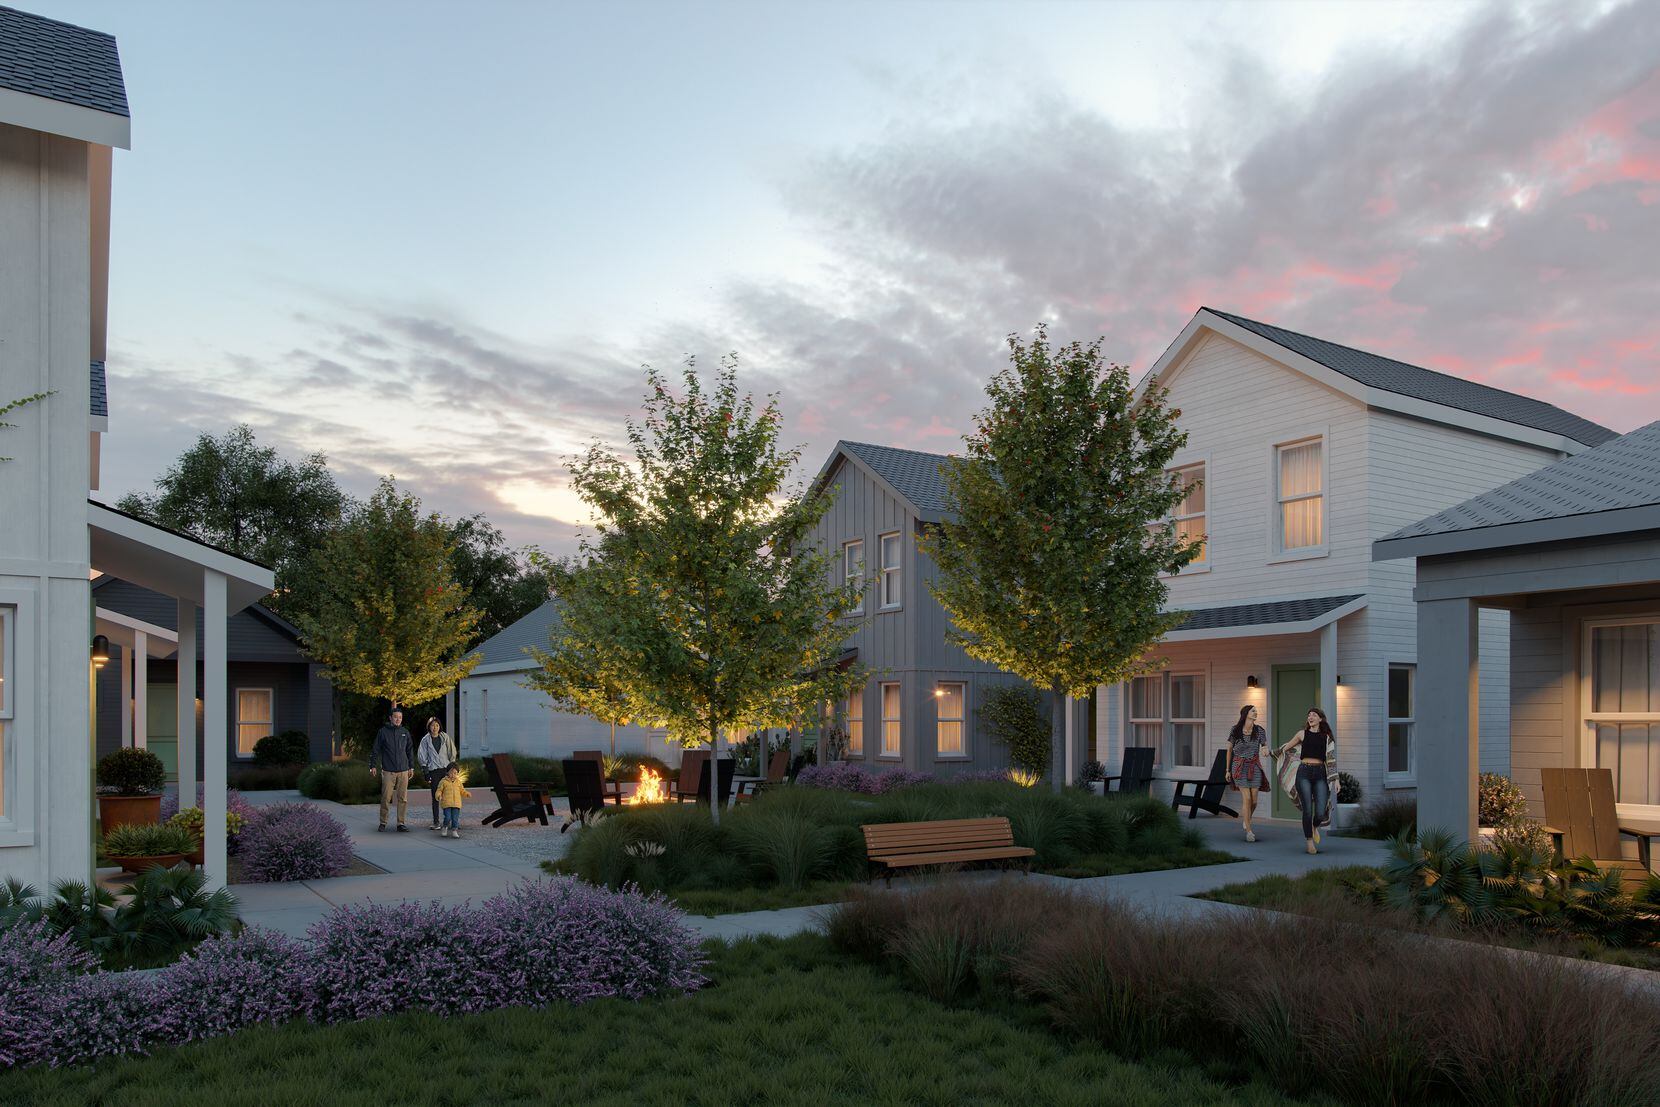 The courtyard of the Perch community in Denton, which will have 195 cottage-style homes.